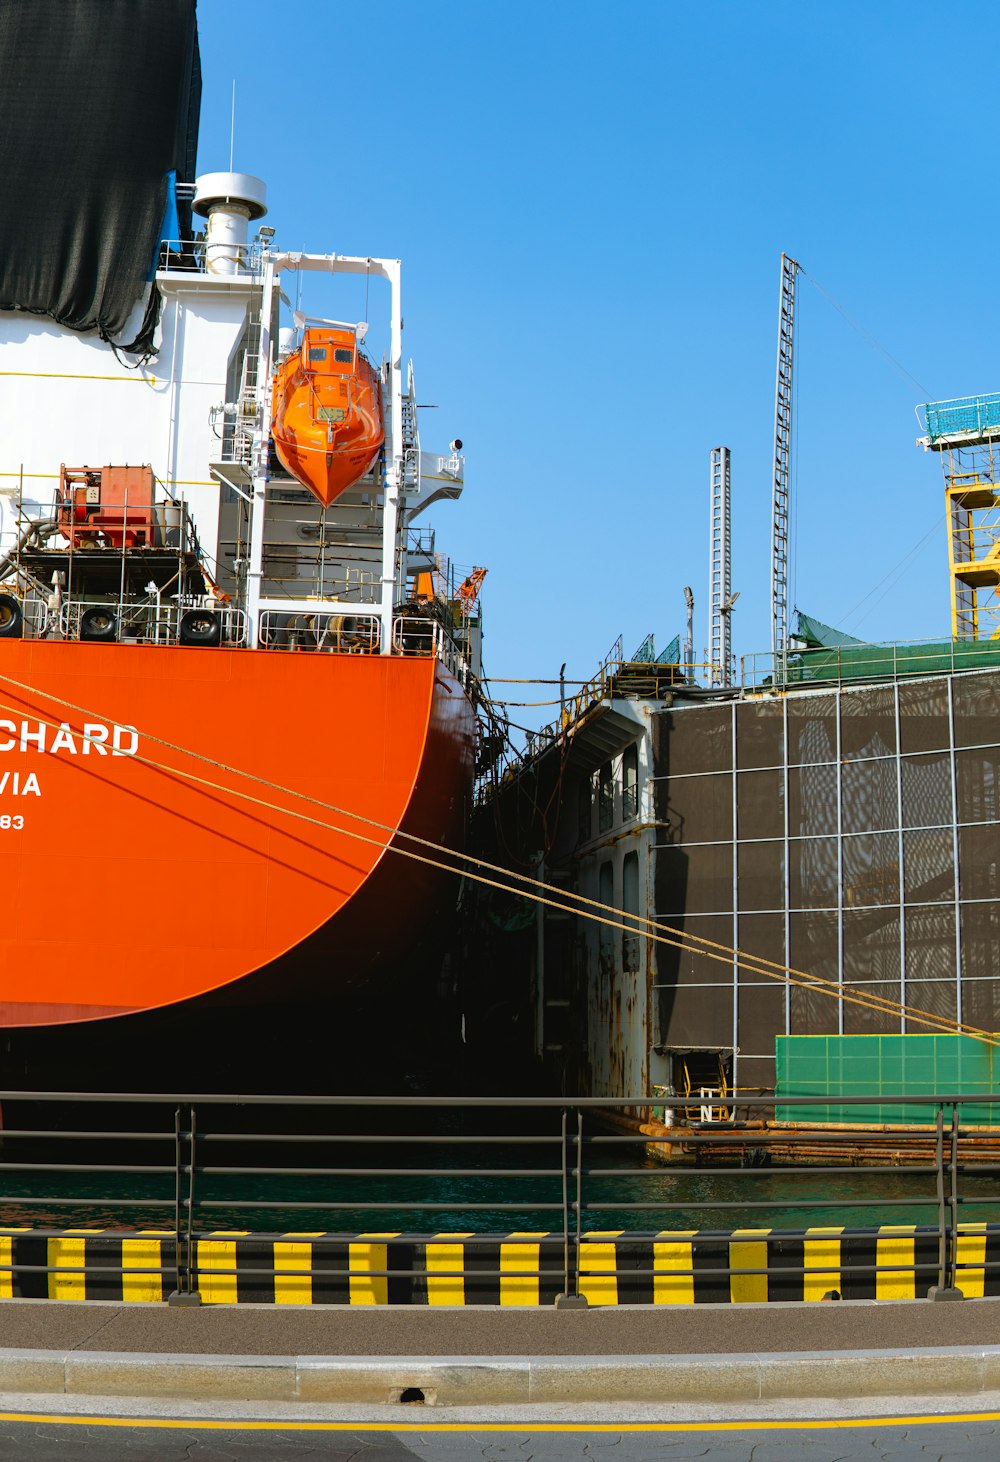 a large orange boat sitting in a dry dock